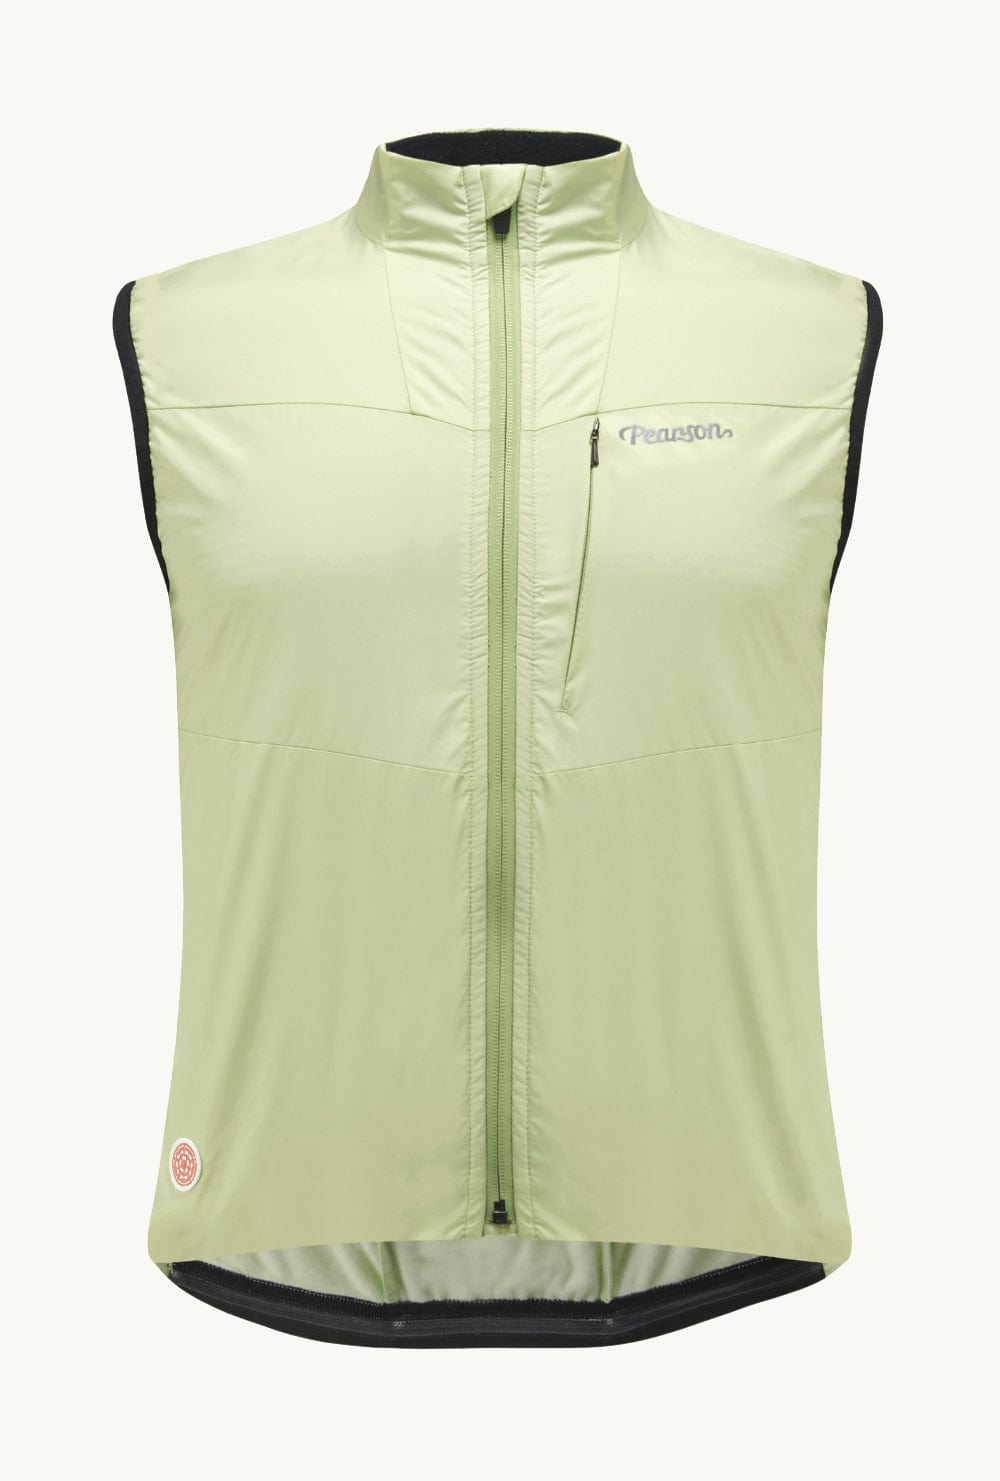 Pearson 1860  Feel The Benefits - Road Insulated Gilet Shadow Lime  Xx-large / Shadow Lime